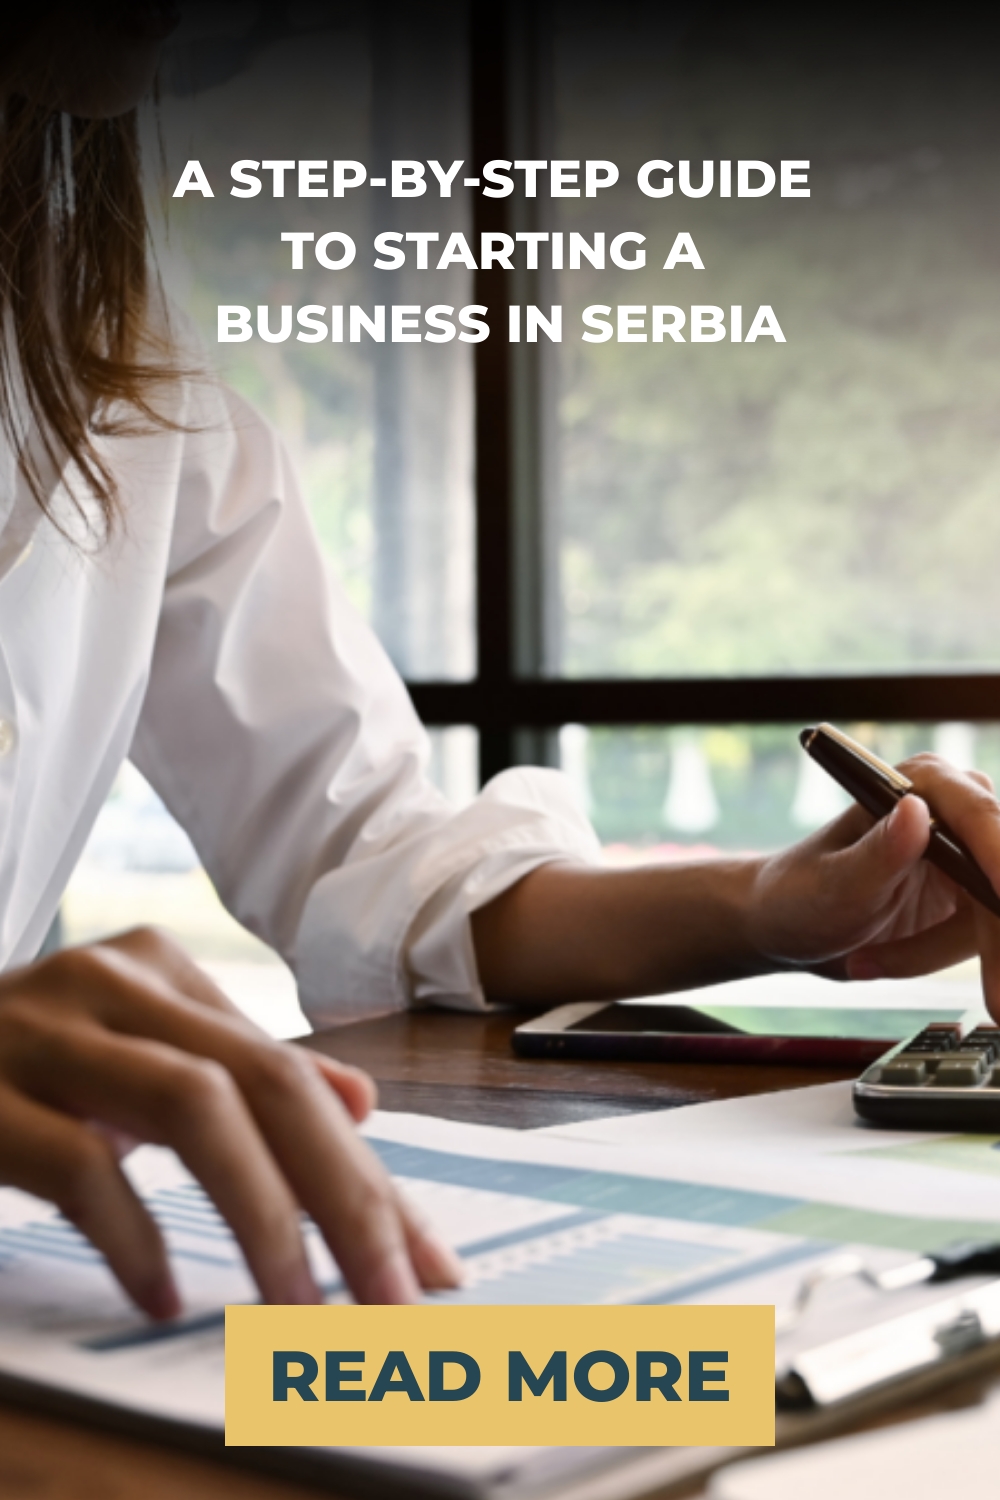 A Step-by-Step Guide to Starting a Business in Serbia